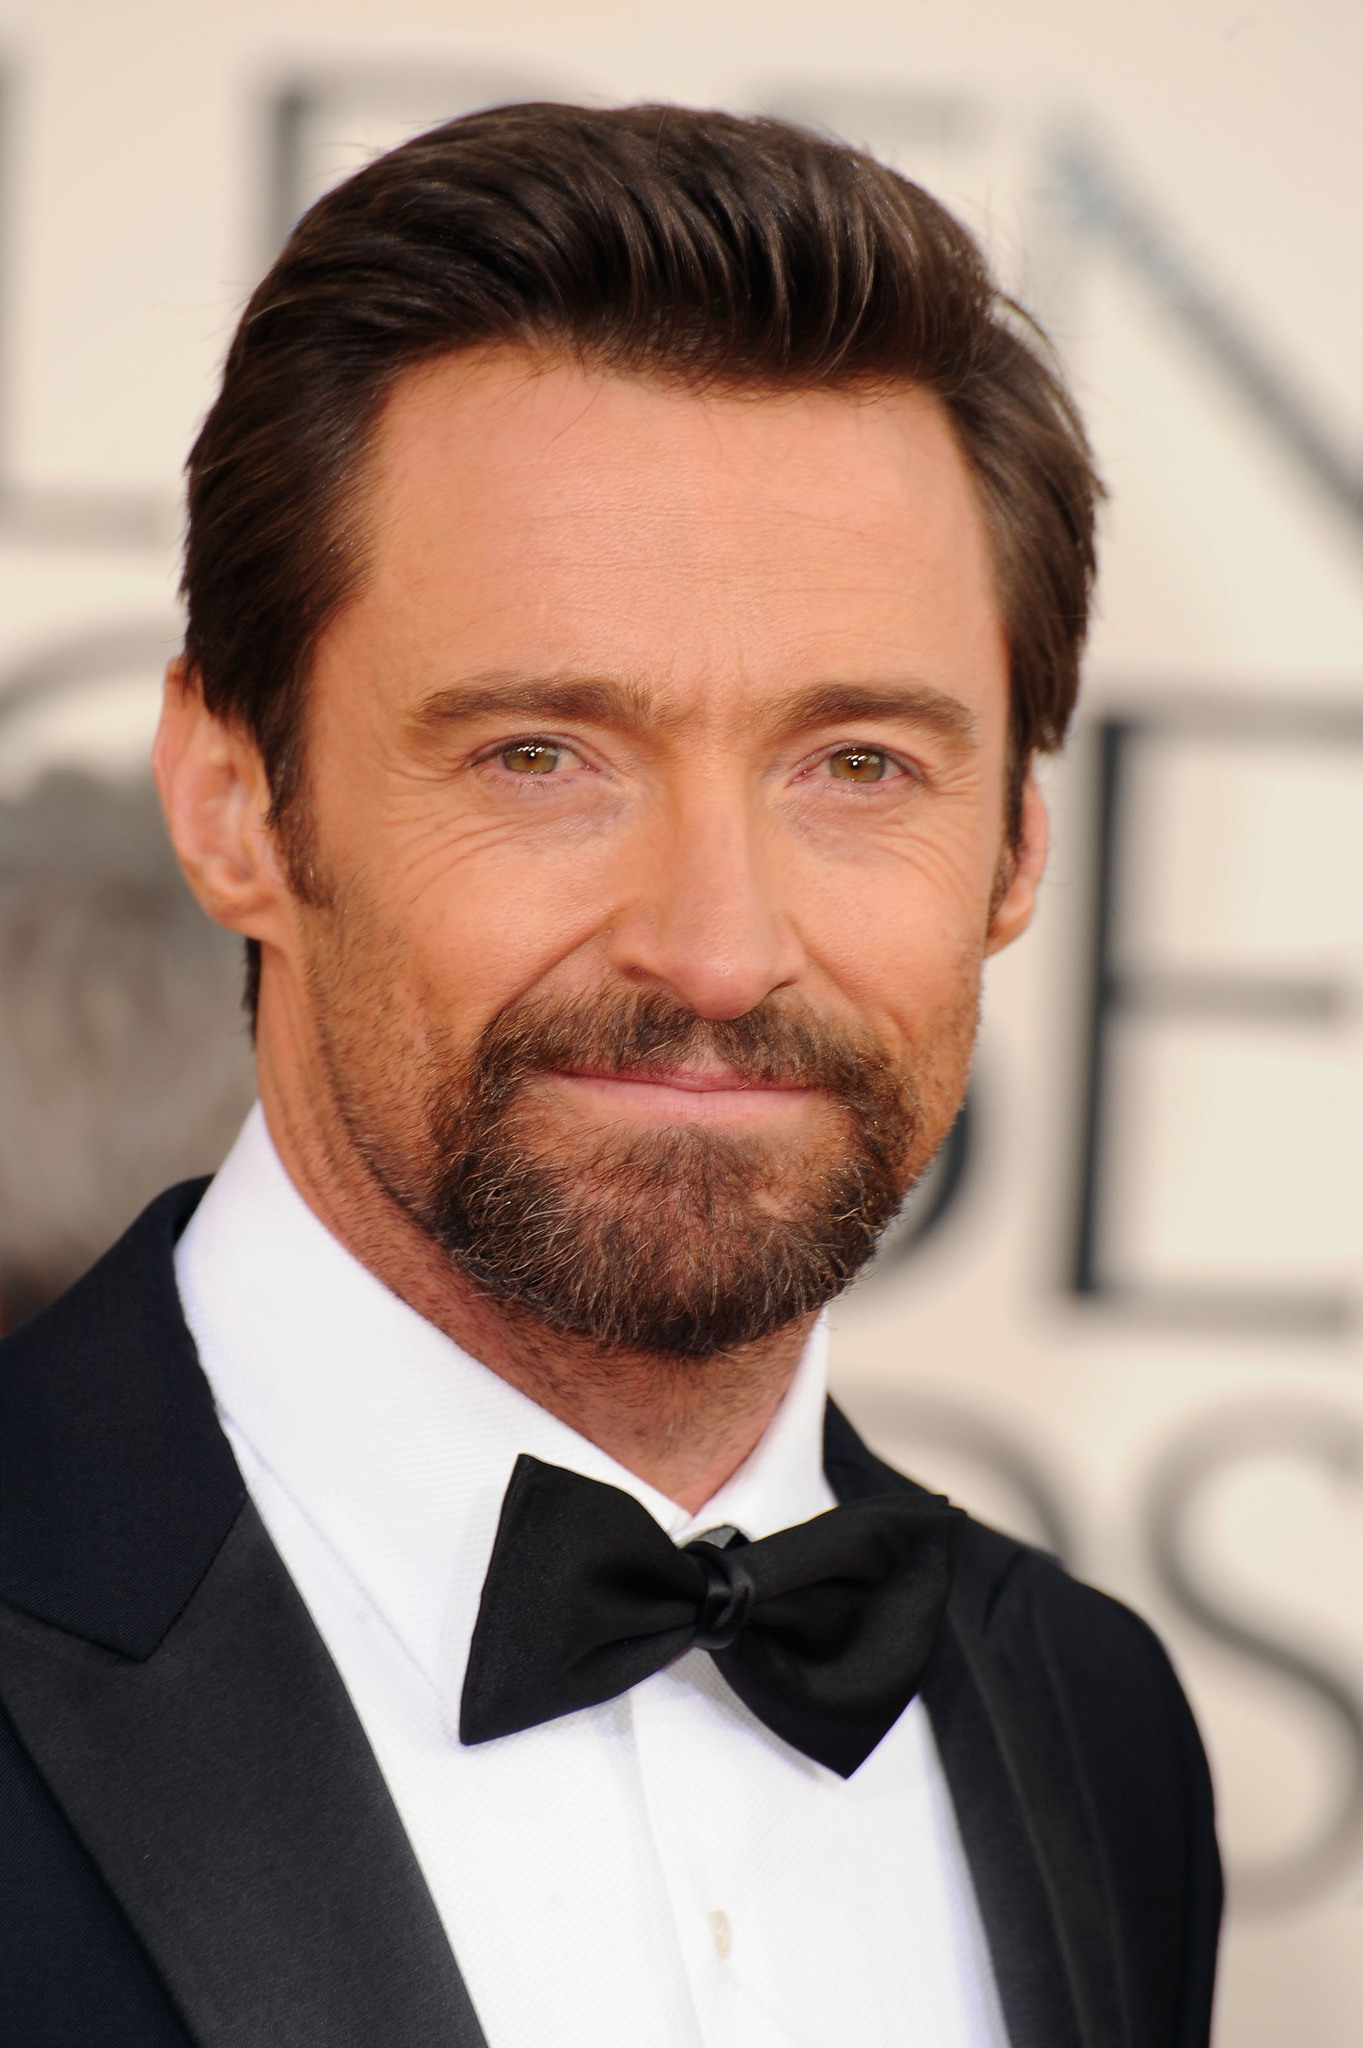 A friend of mine went to the premiere of X-Men Origins Wolverine and they camped out by the theater, he said he woke up and he was told that Hugh Jackman had bought everyone who camped breakfast. It was a little breakfast sandwich and an orange juice I believe, he also said there was at least 100 people there.